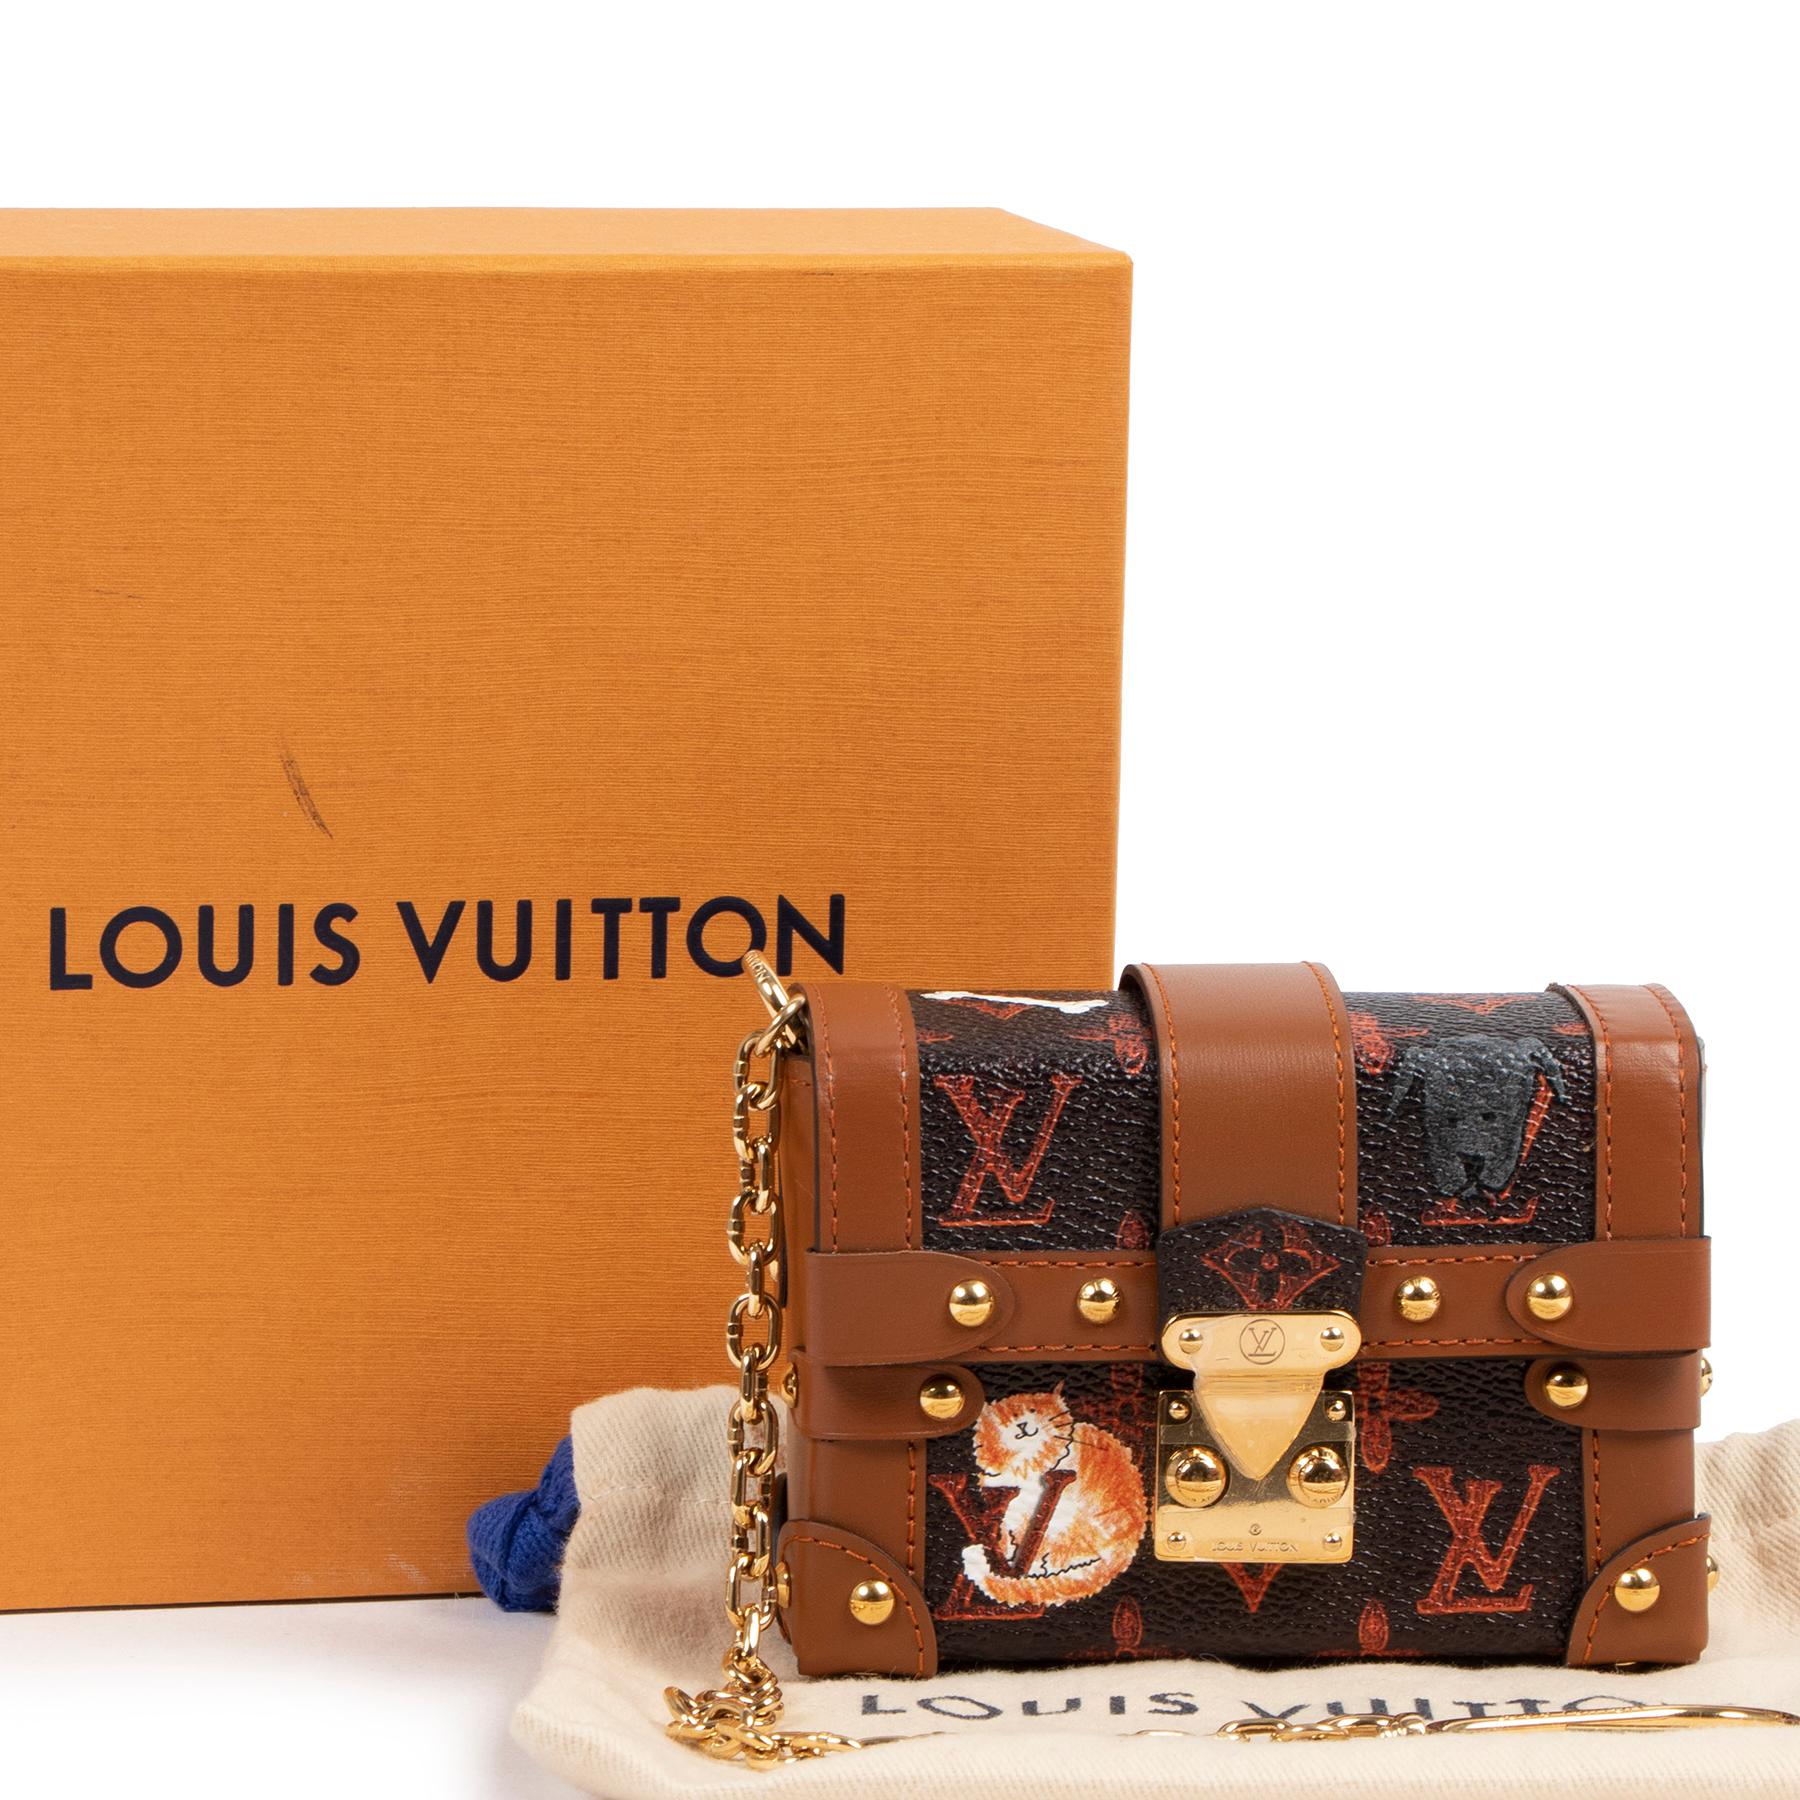 New

Very Limited Louis Vuitton Miniature Essential Trunk Petite-Malle

The emblematic fashion editor Grace Coddington has brought her idiosyncratic eye to a capsule collection eflecting her adoration of animals.
The illustrations that decorate this